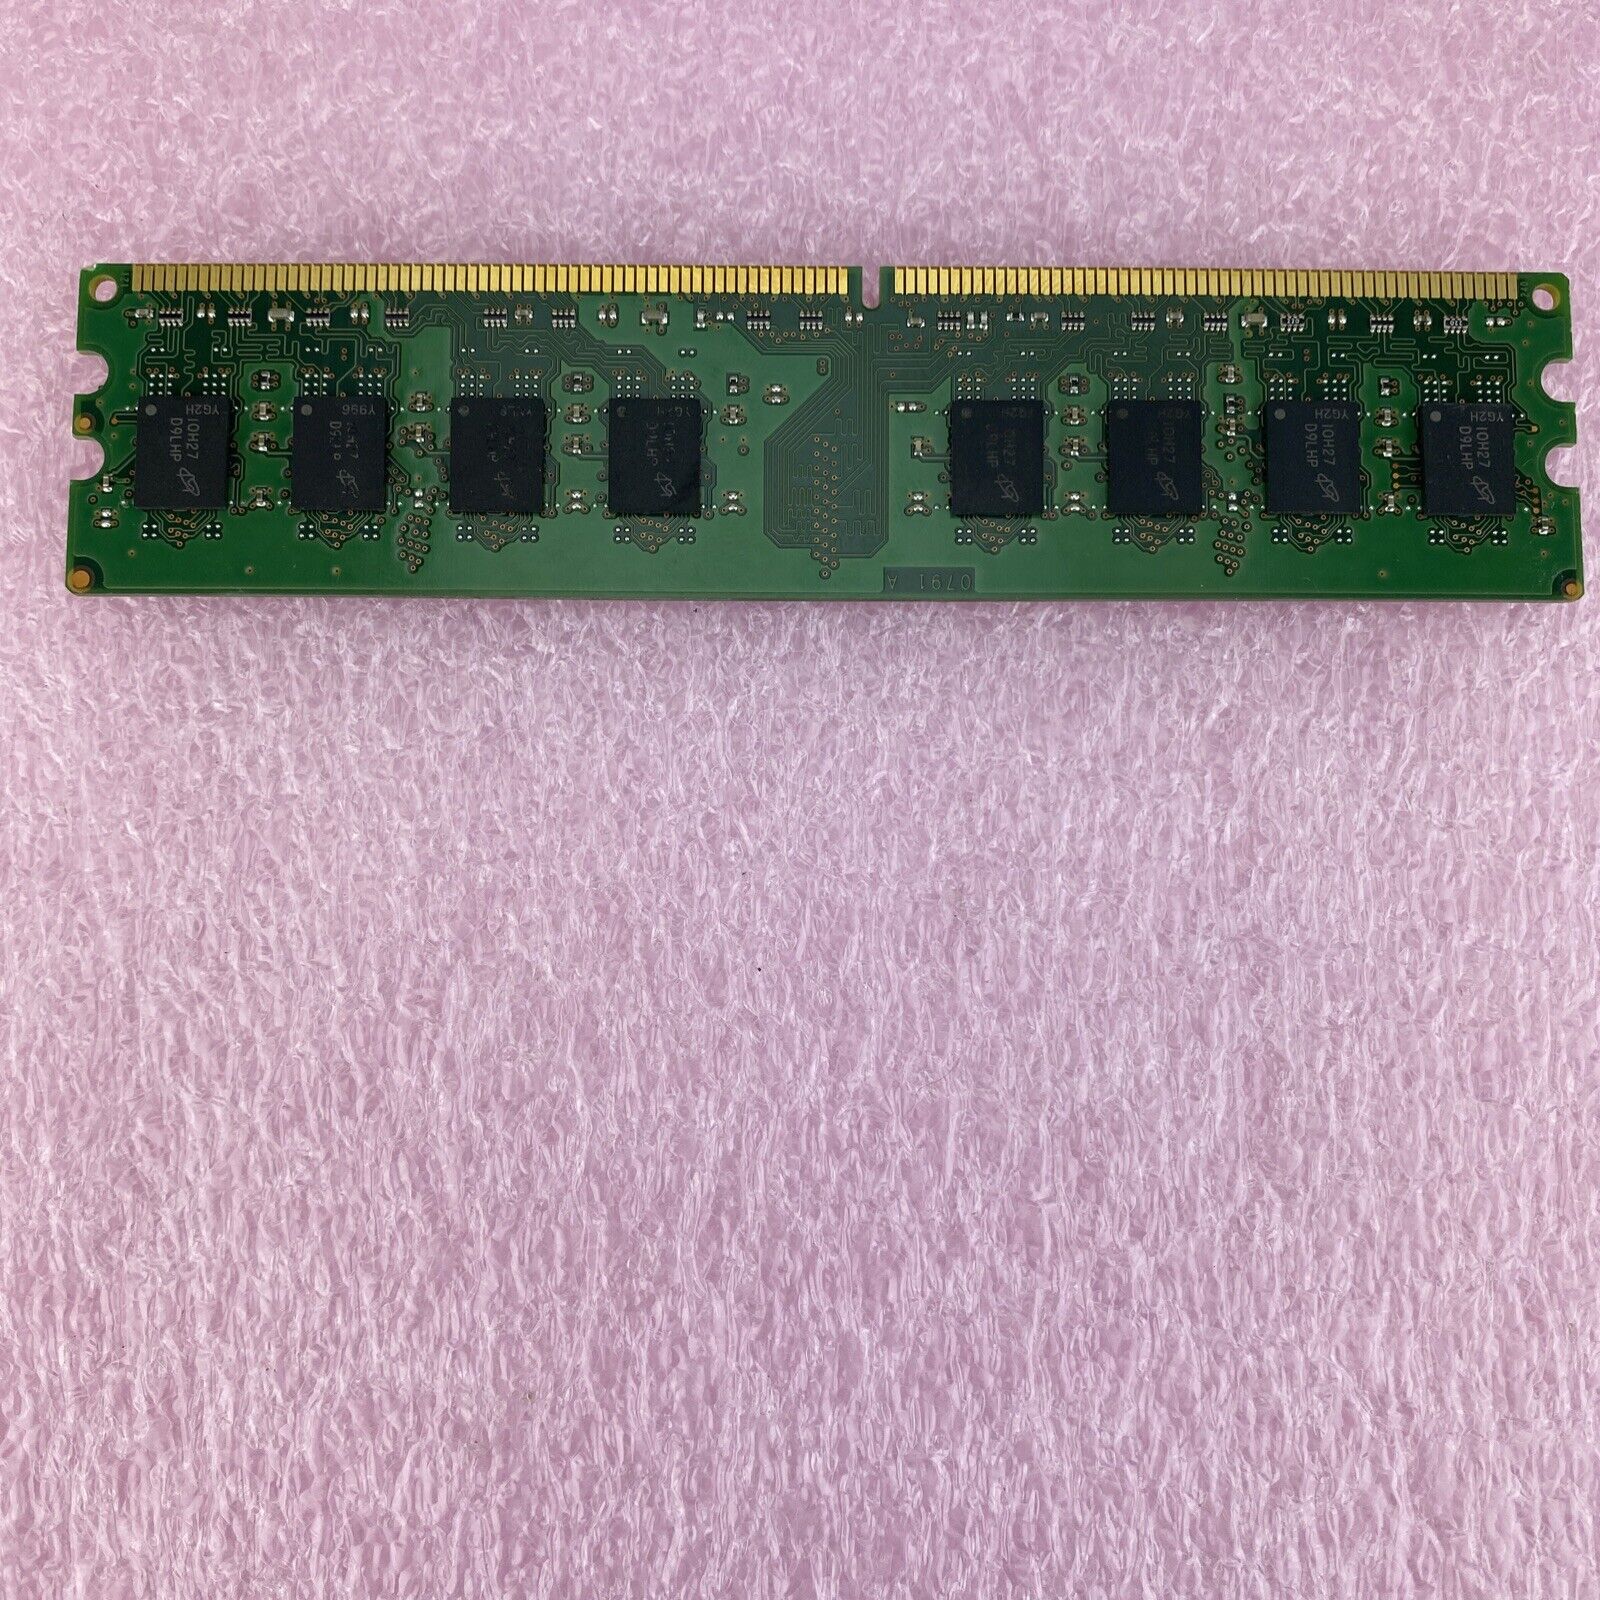 2GB Crucial CT25664AA66 PC2-5300 DDR2 DIMM 667MHz memory RAM